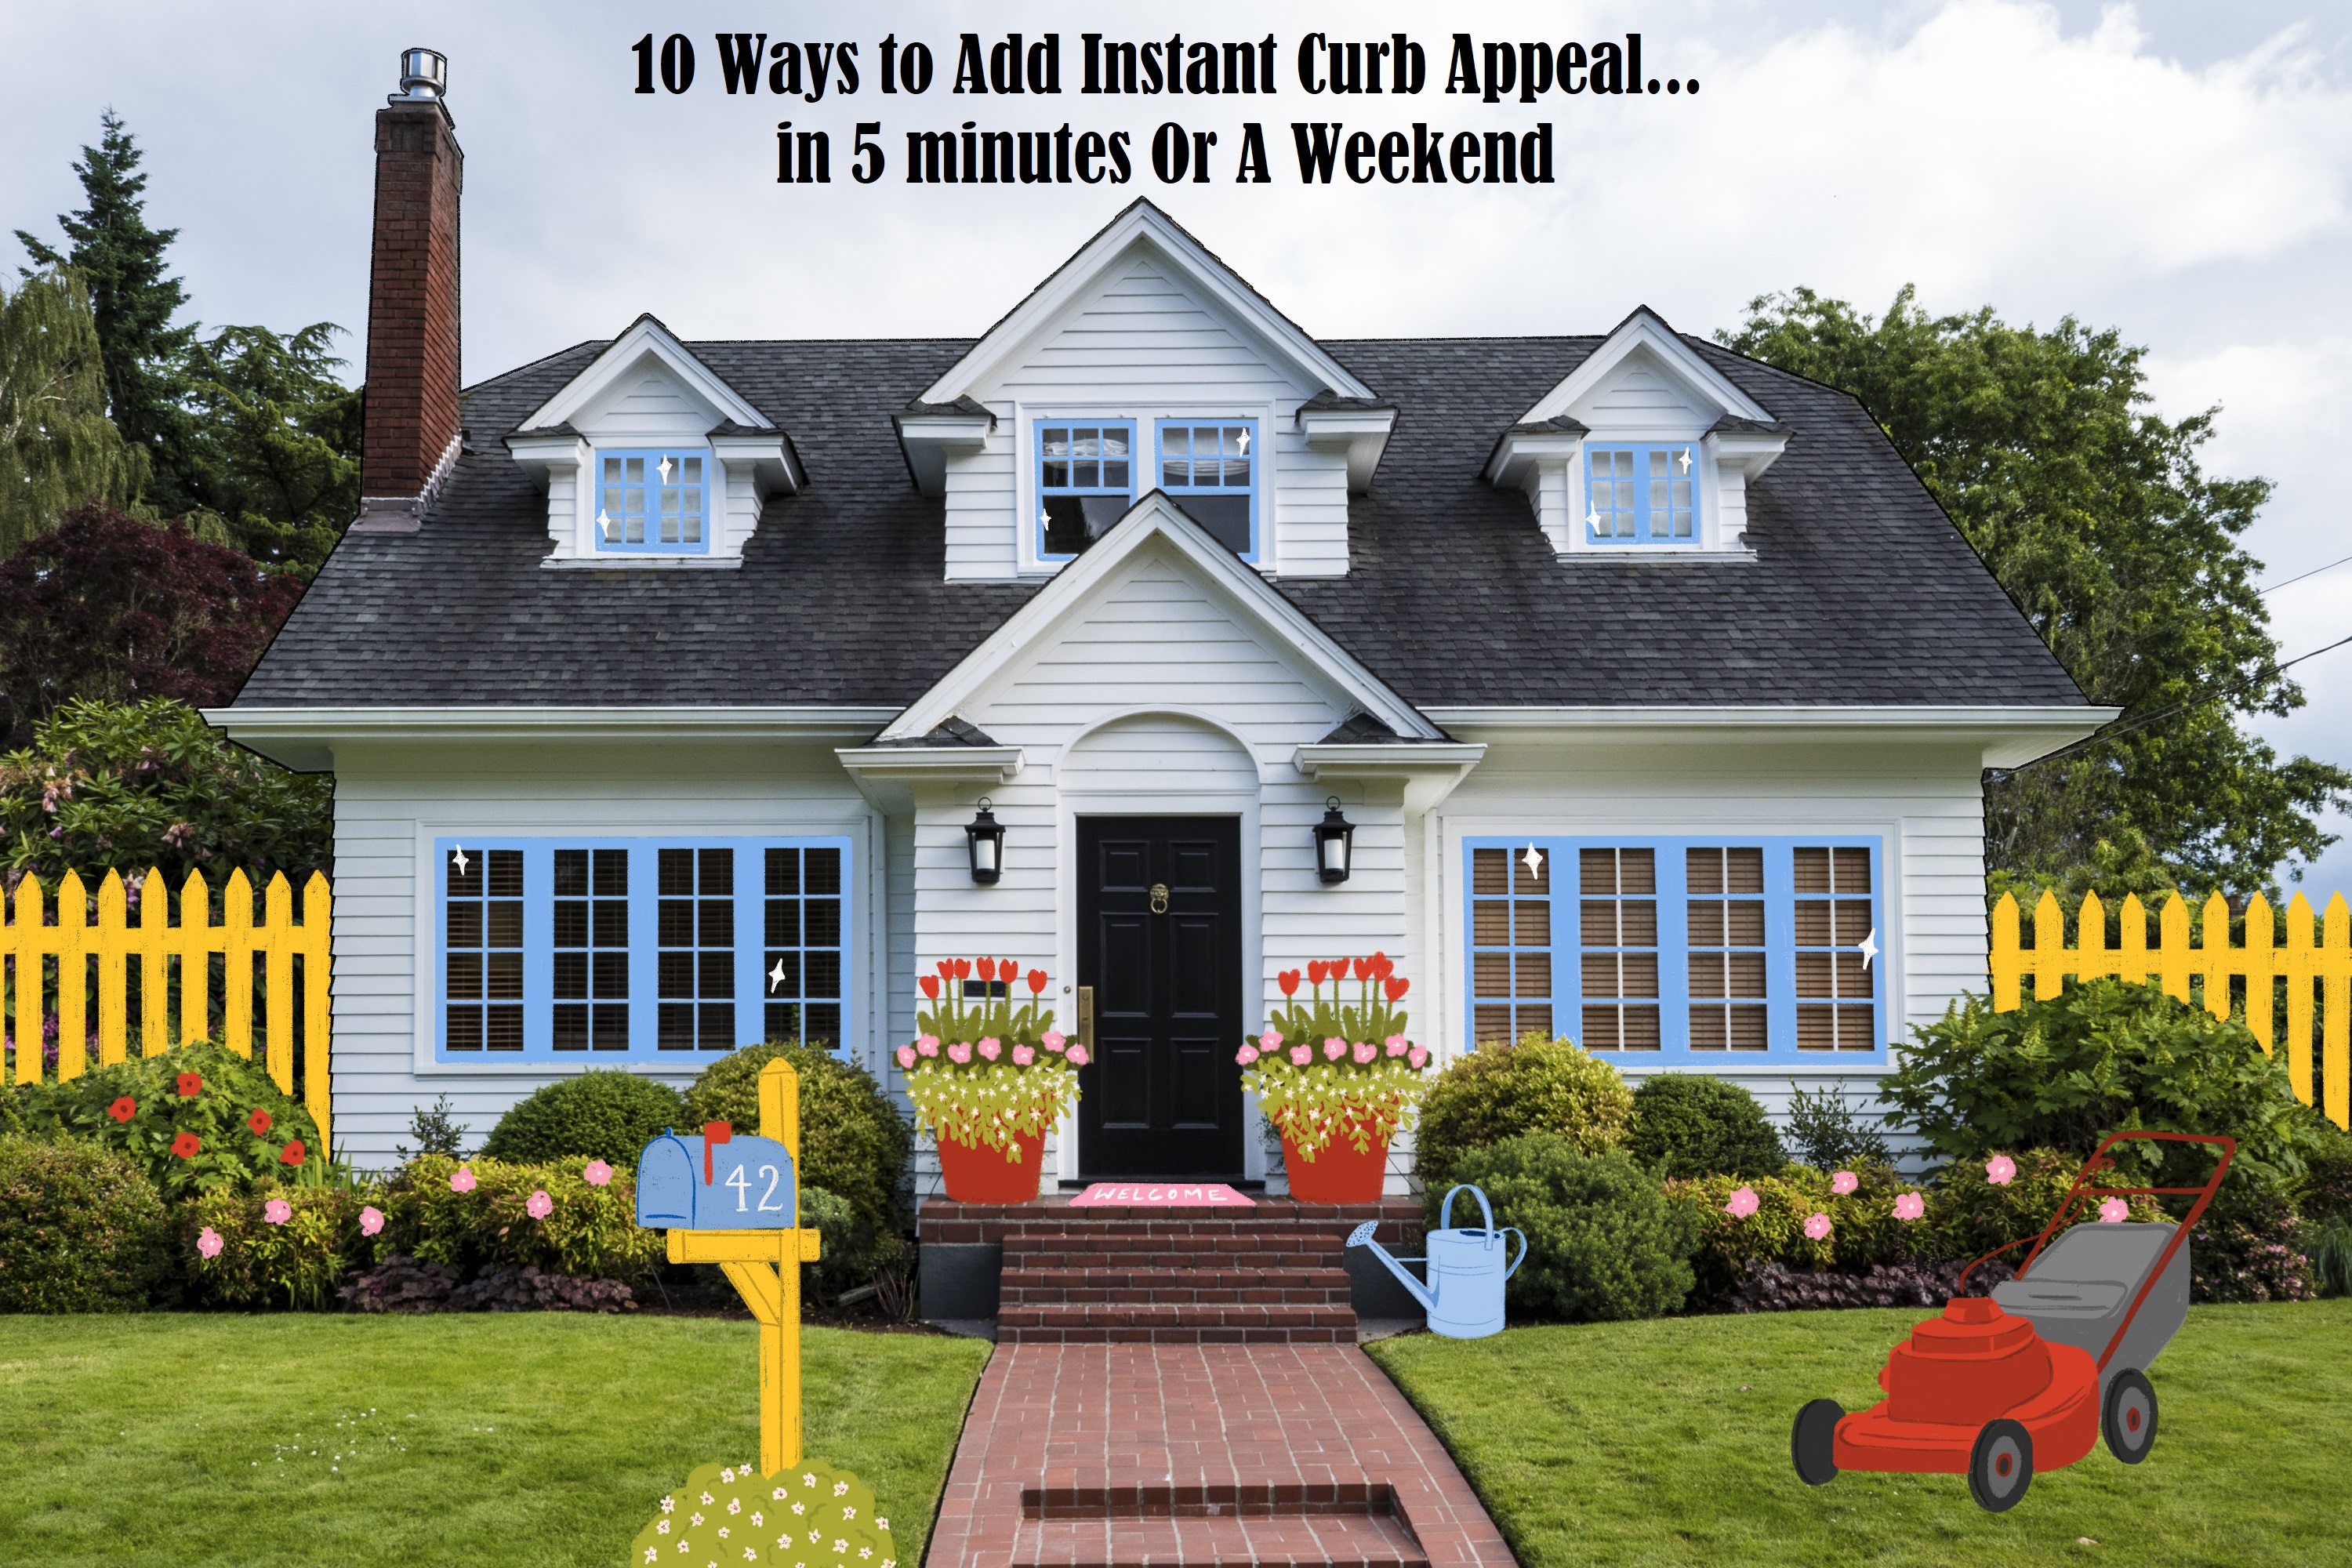 10 Fresh Ideas for Creating Curb Appeal - 5 Minute Jobs to Weekend Efforts